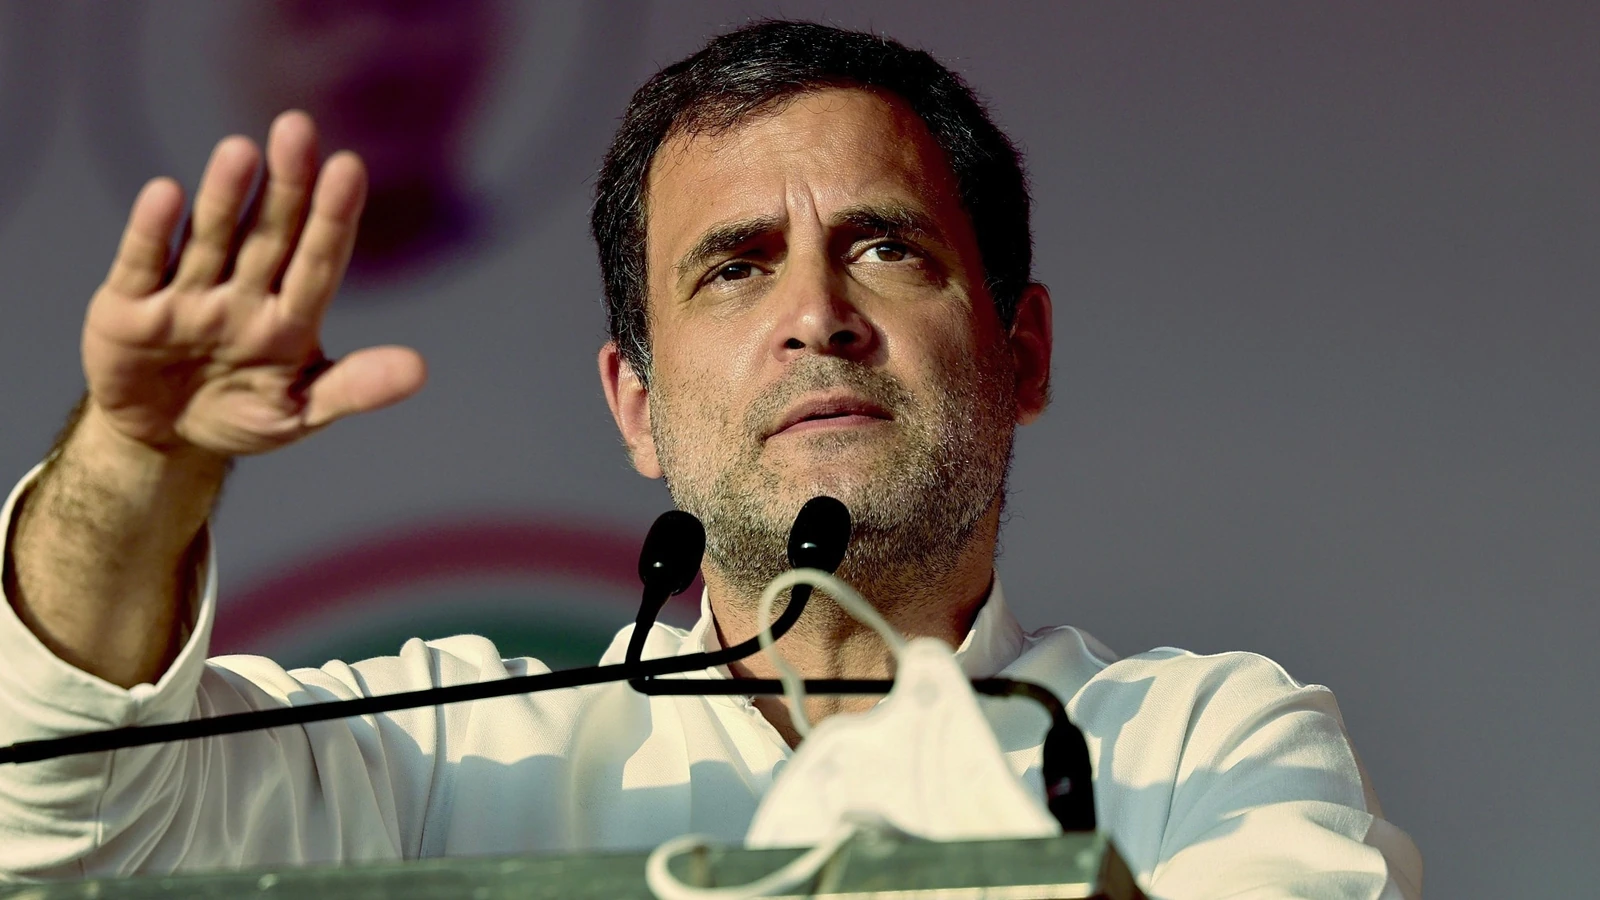 Rahul Gandhi to campaign in Manipur today, day after phase-1 polling